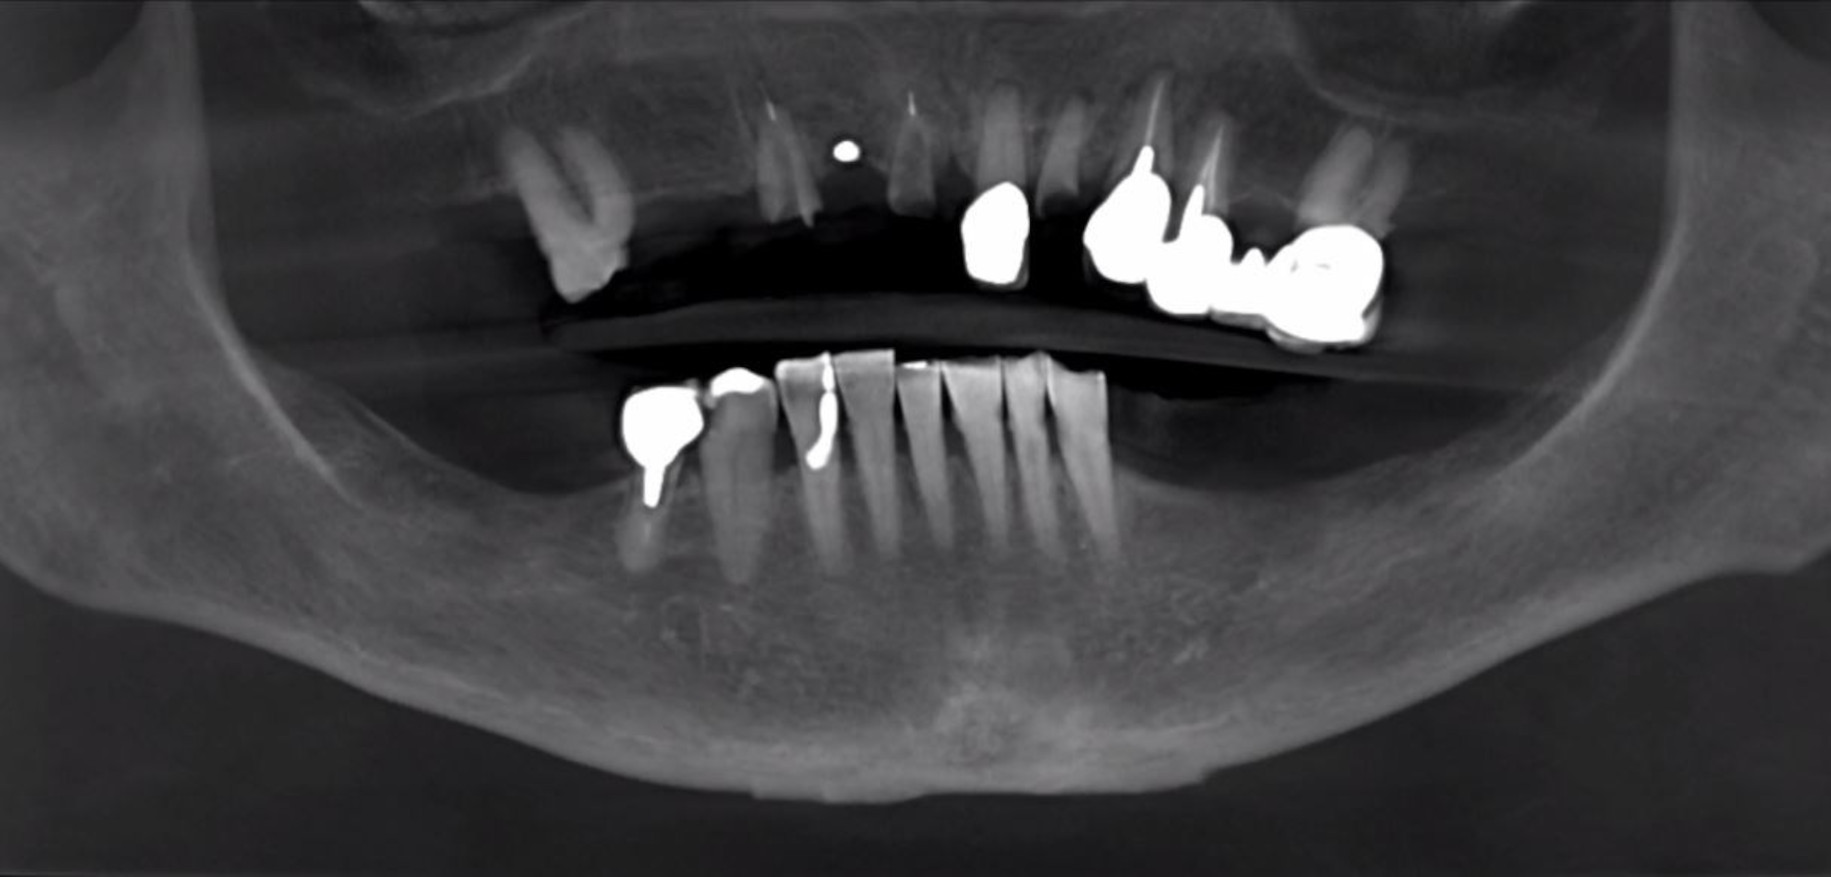 Fig. 2: Panoramic reconstructed view revealing fractured teeth, residual root tips and failing dentition.